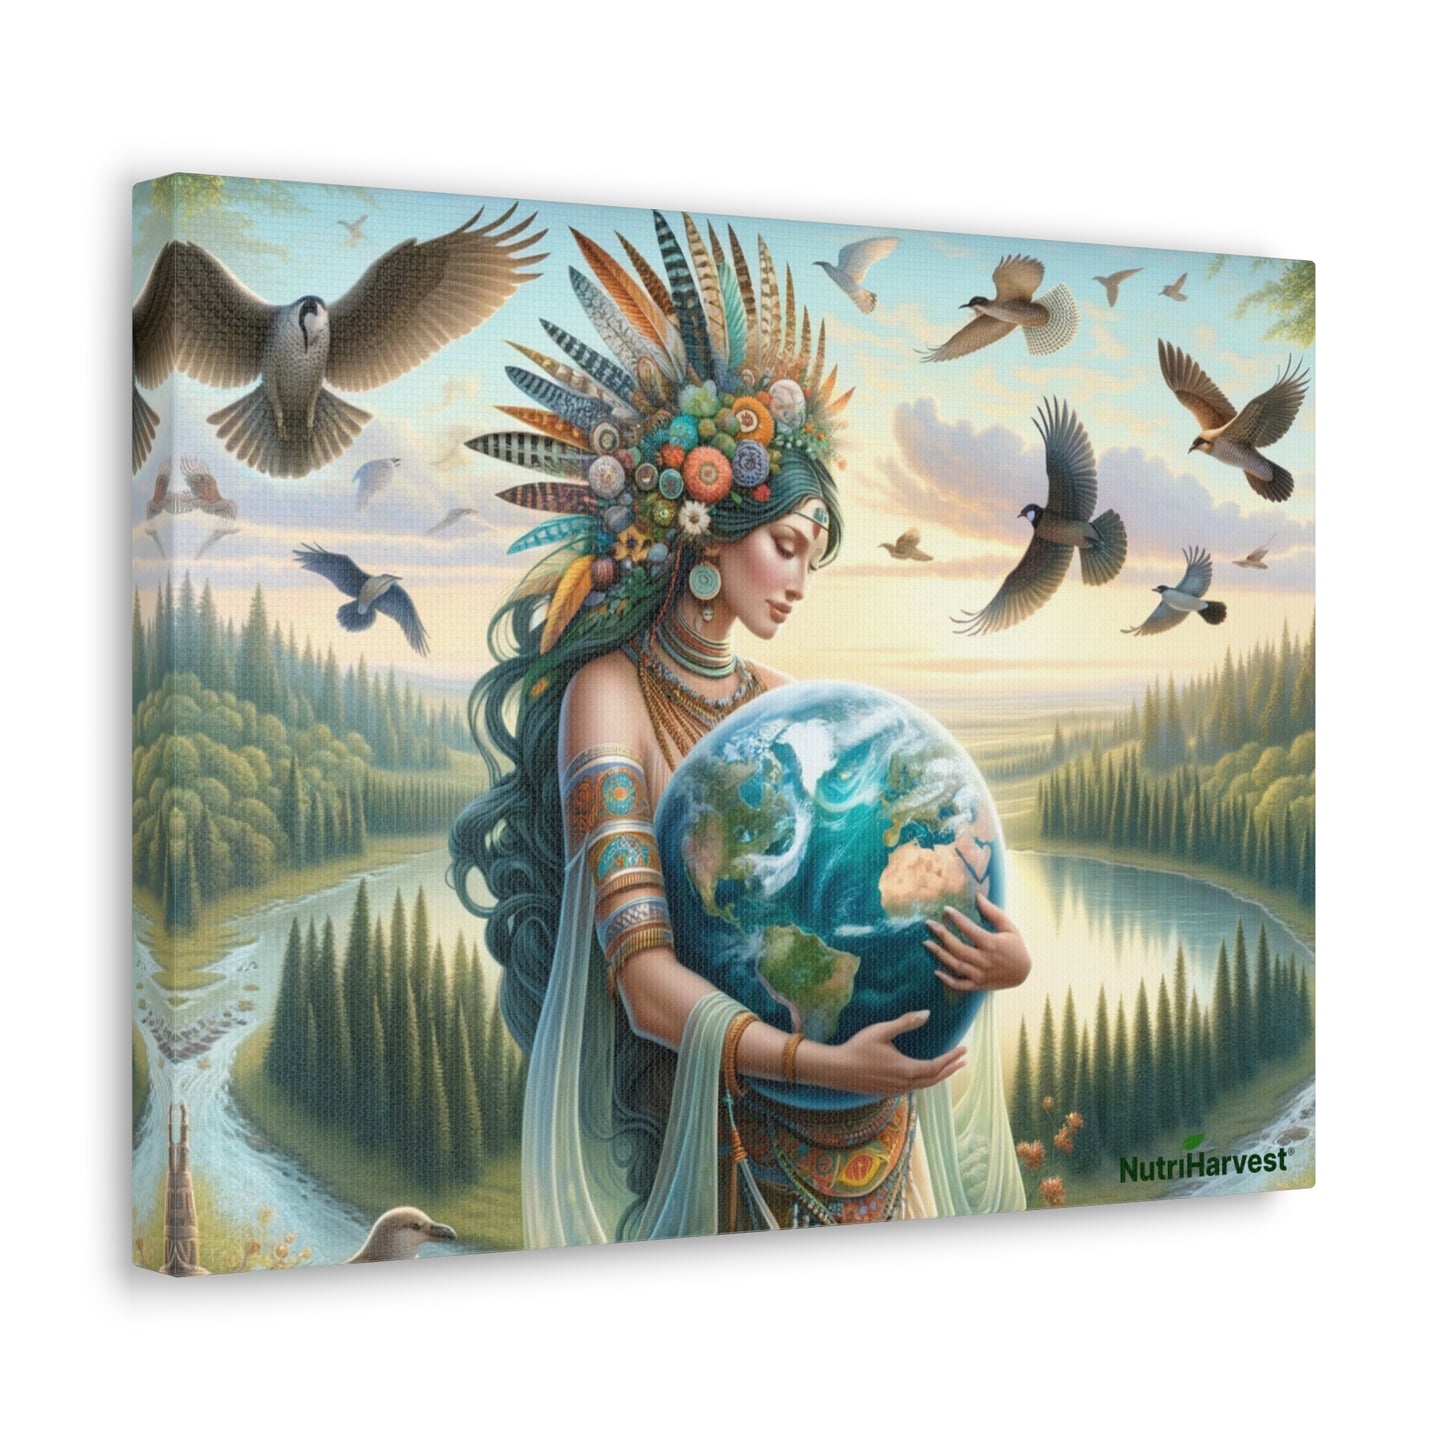 Mother Earth's Keeper, set against a stunning natural background with birds on Classic Canvas